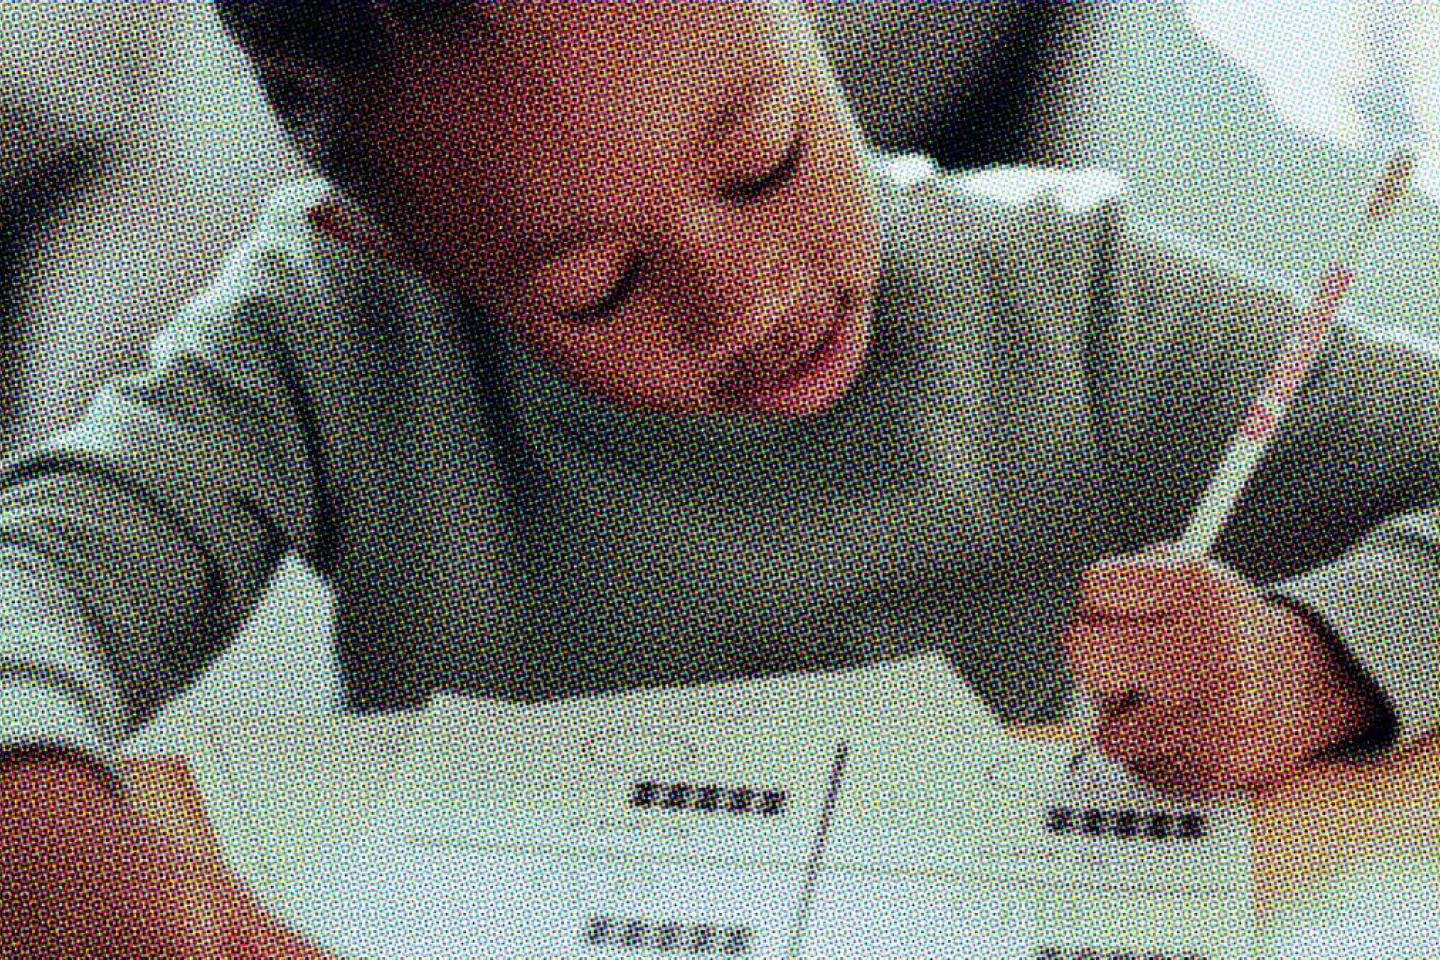 A child at Canary Academy working on an assignment